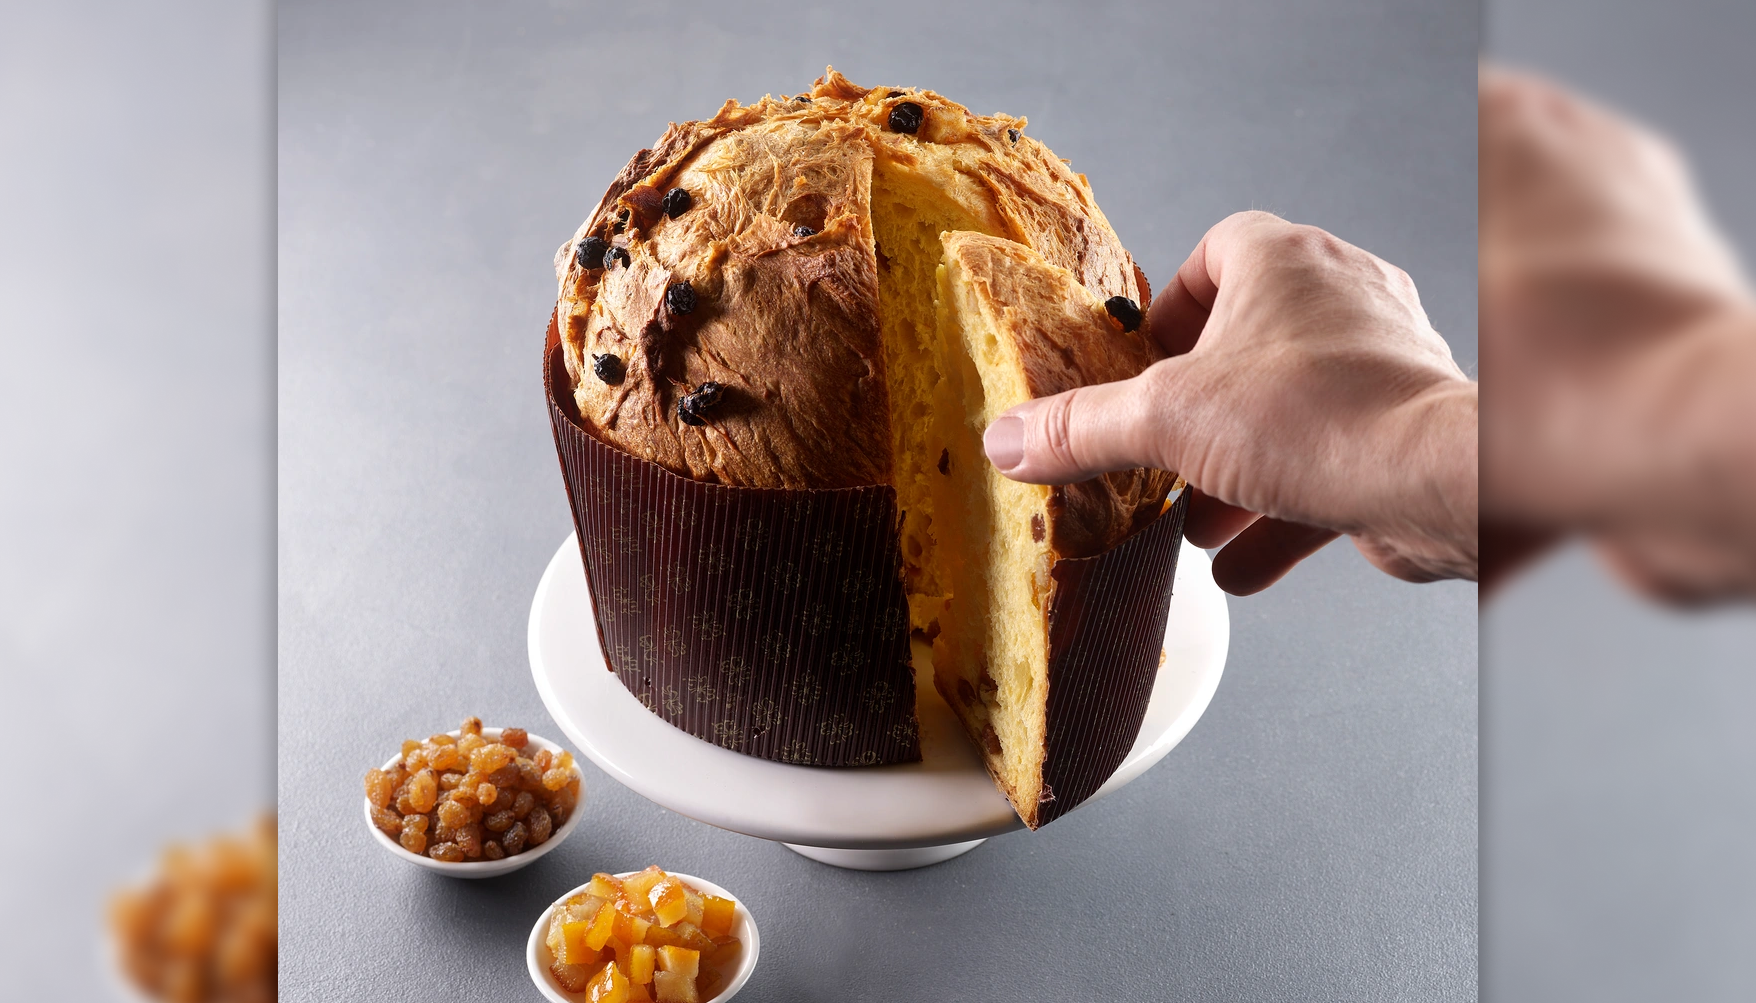 THE RESULTS OF THE FIFTH EDITION OF THE  PANETTONE OBSERVATORY IN ITALY HAVE BEEN RELEASED